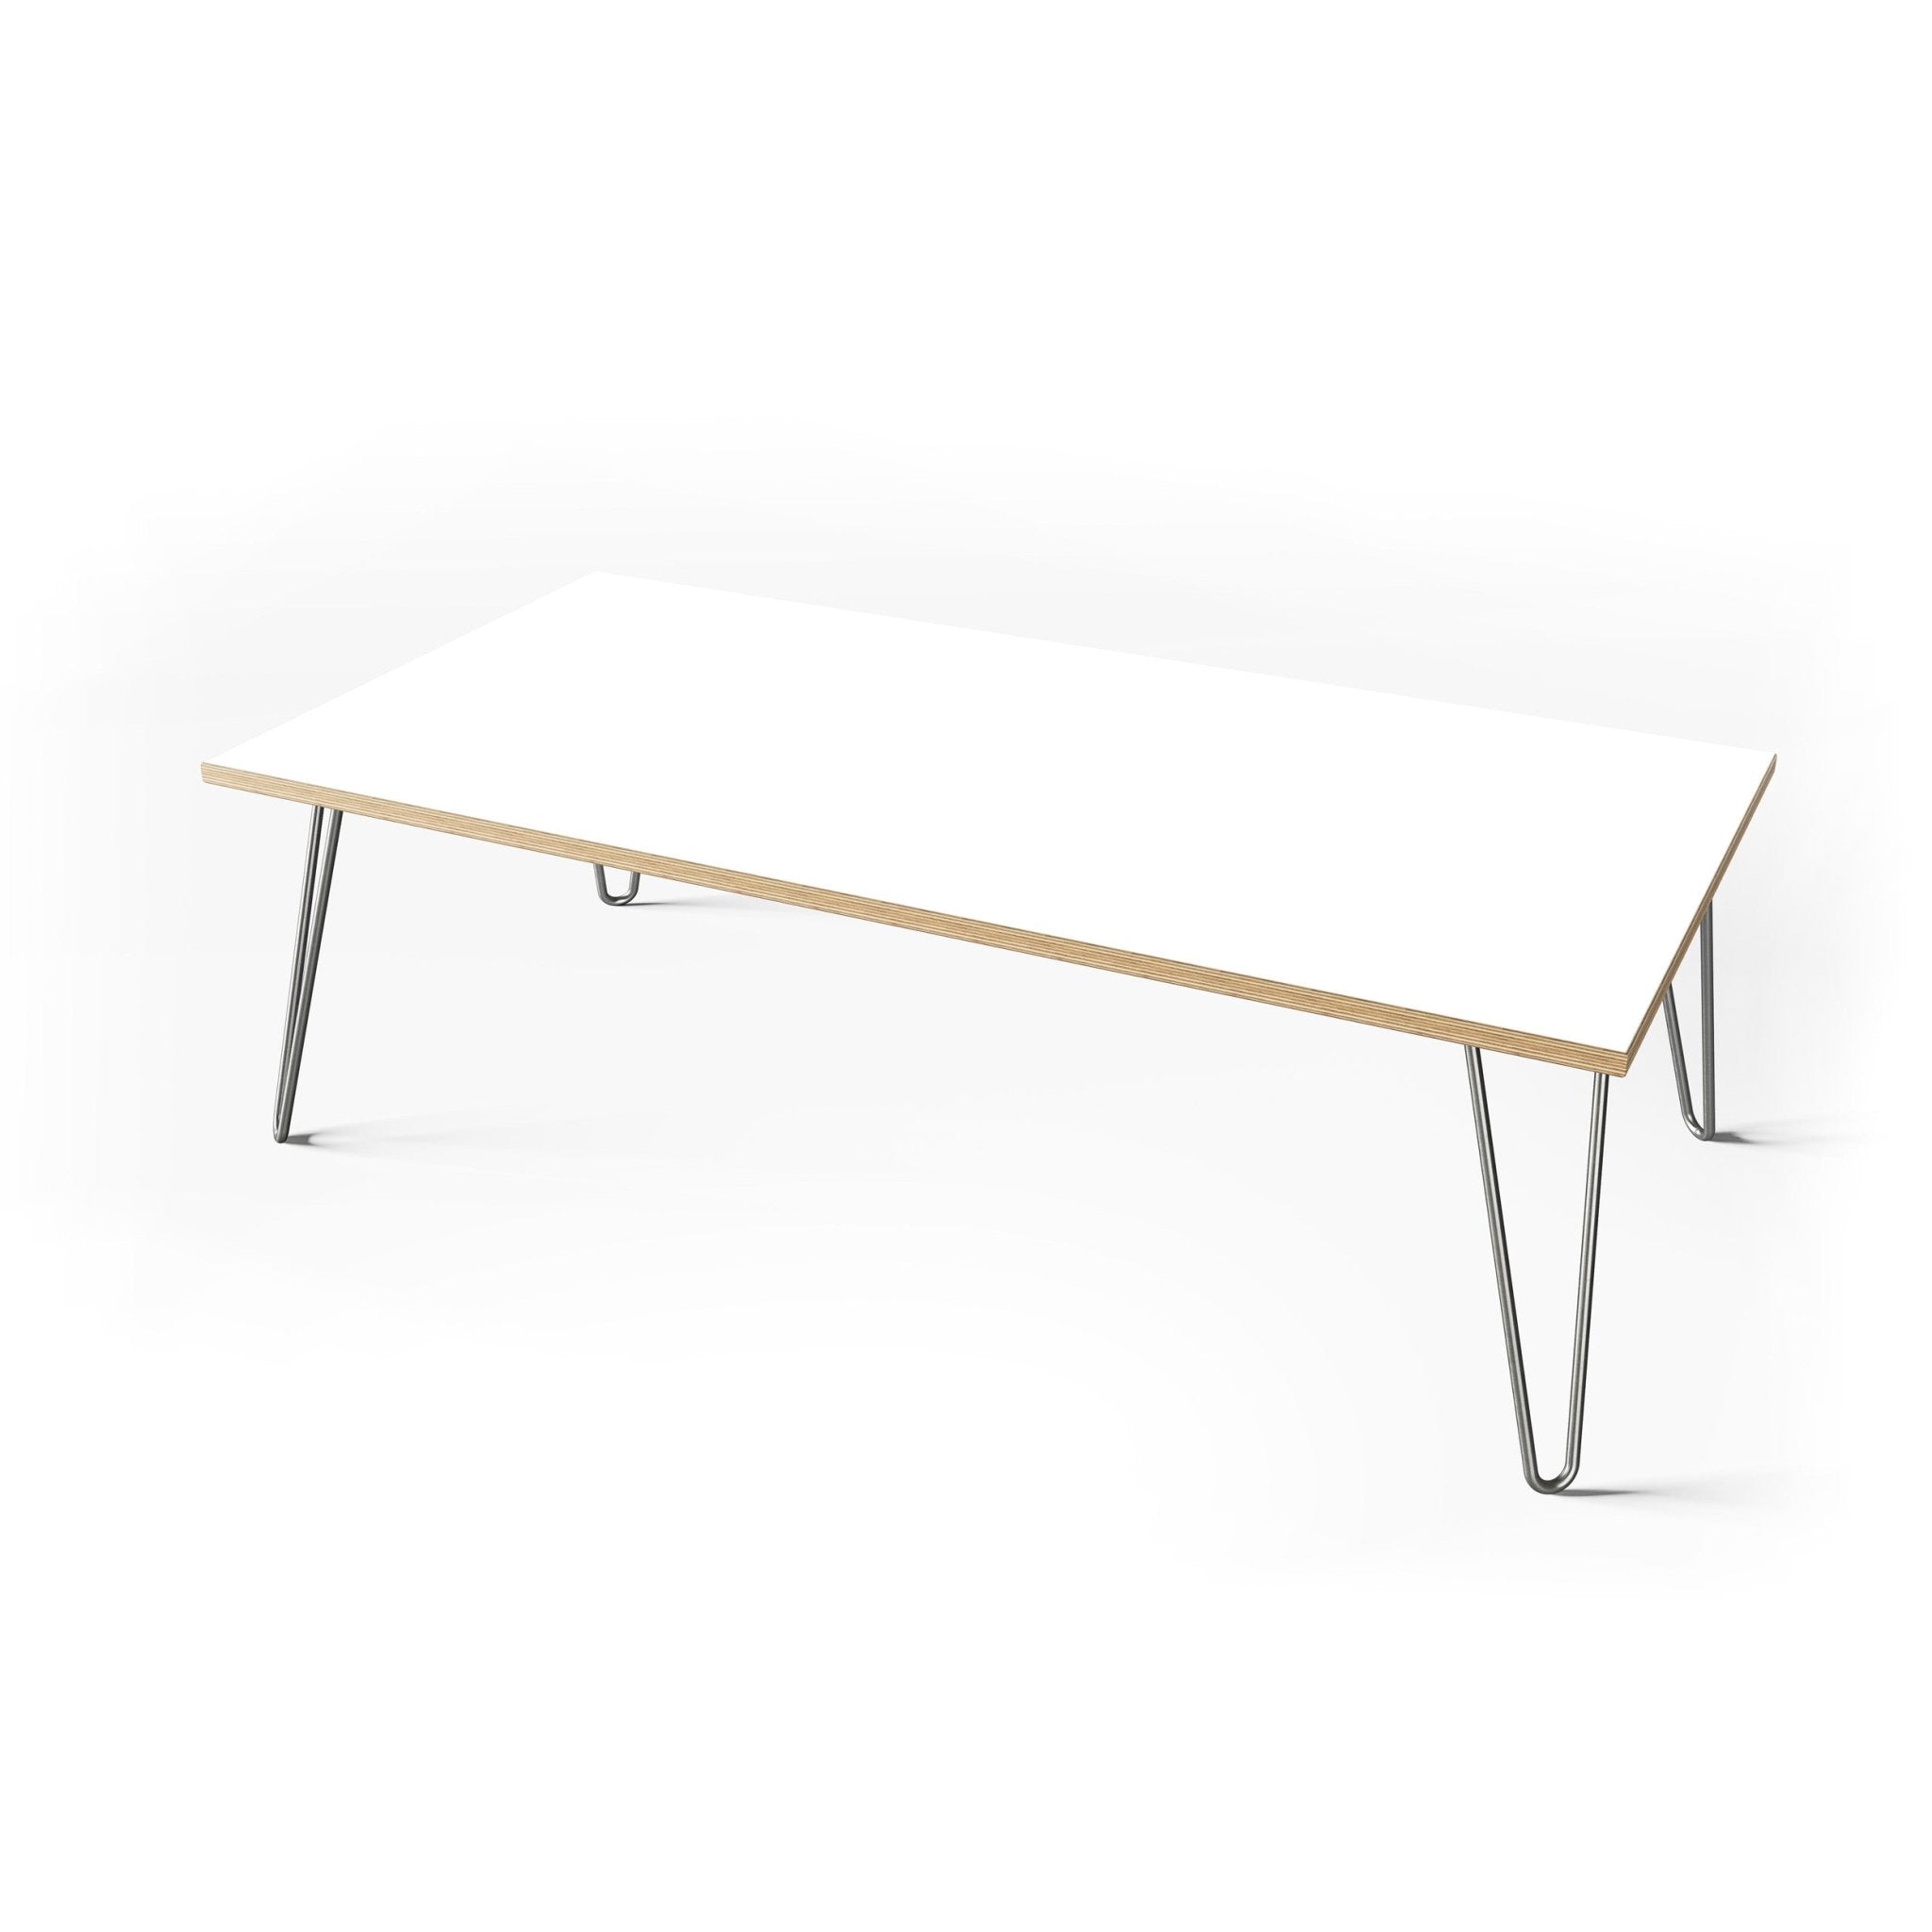 Hairpin Coffee Table-White-Clear Coat-The Hairpin Leg Co.